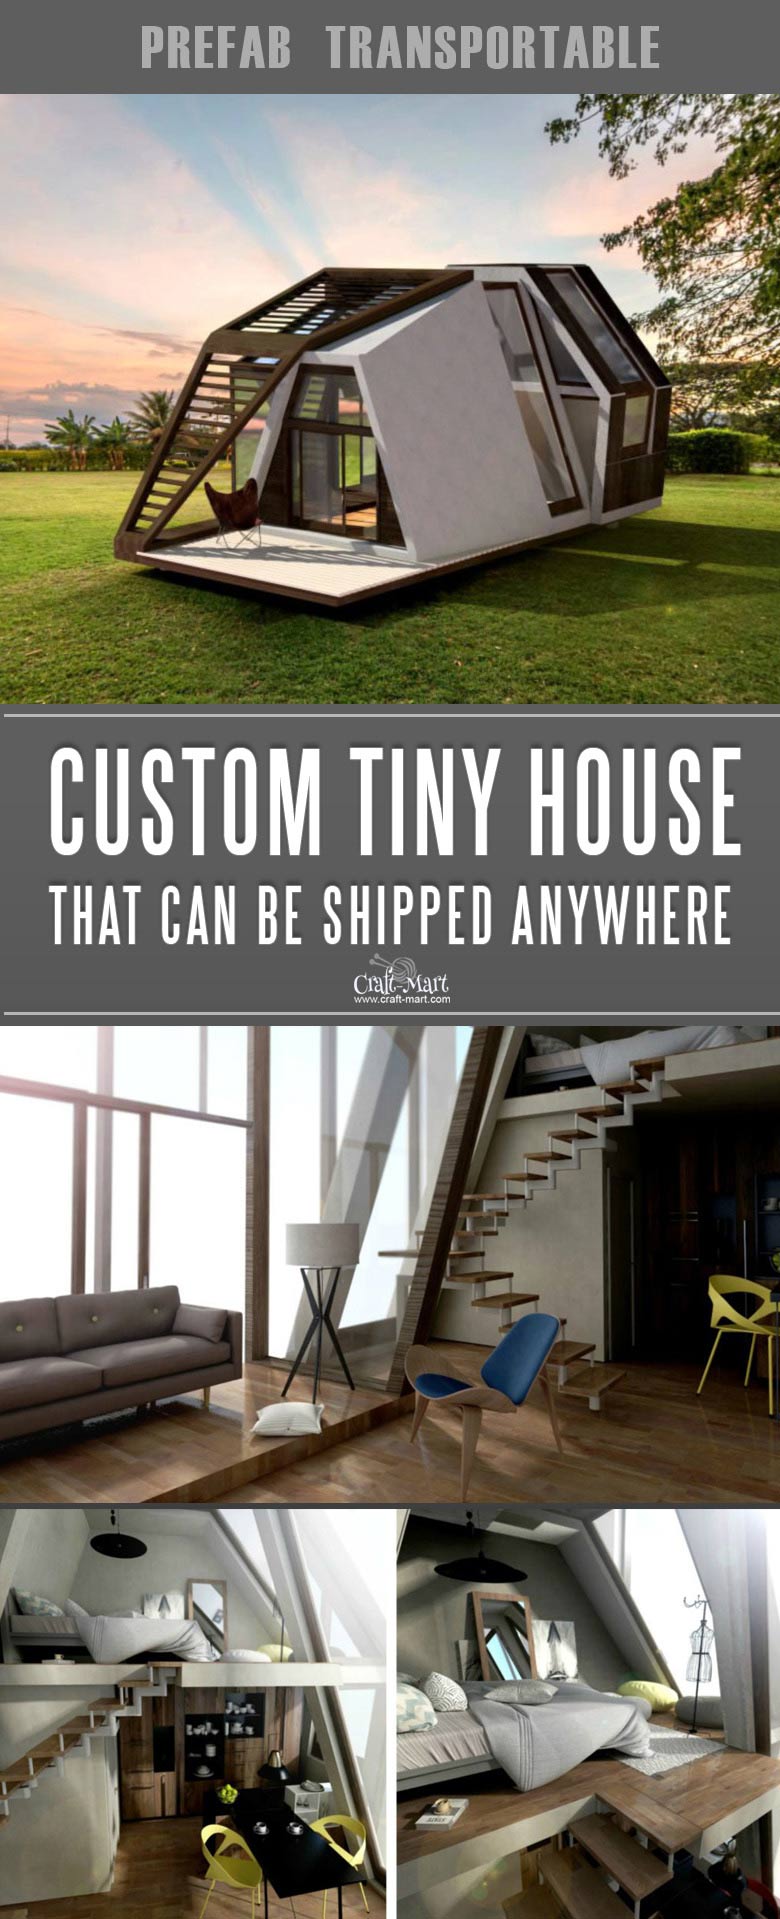 Custom tiny house that you can order from anywhere in the world! Look at these absolutely awesome tiny houses that you can afford! Some are 100% sustainable and do NOT need any utilities besides internet! You can add custom features from most of the tiny home builders. Keep dreaming on or take an action and get one of these little affordable homes!#tinyhouseplans #tinyhome #tinyhouses #diywoodcrafts #diyproject #realestate #smallhouseplans